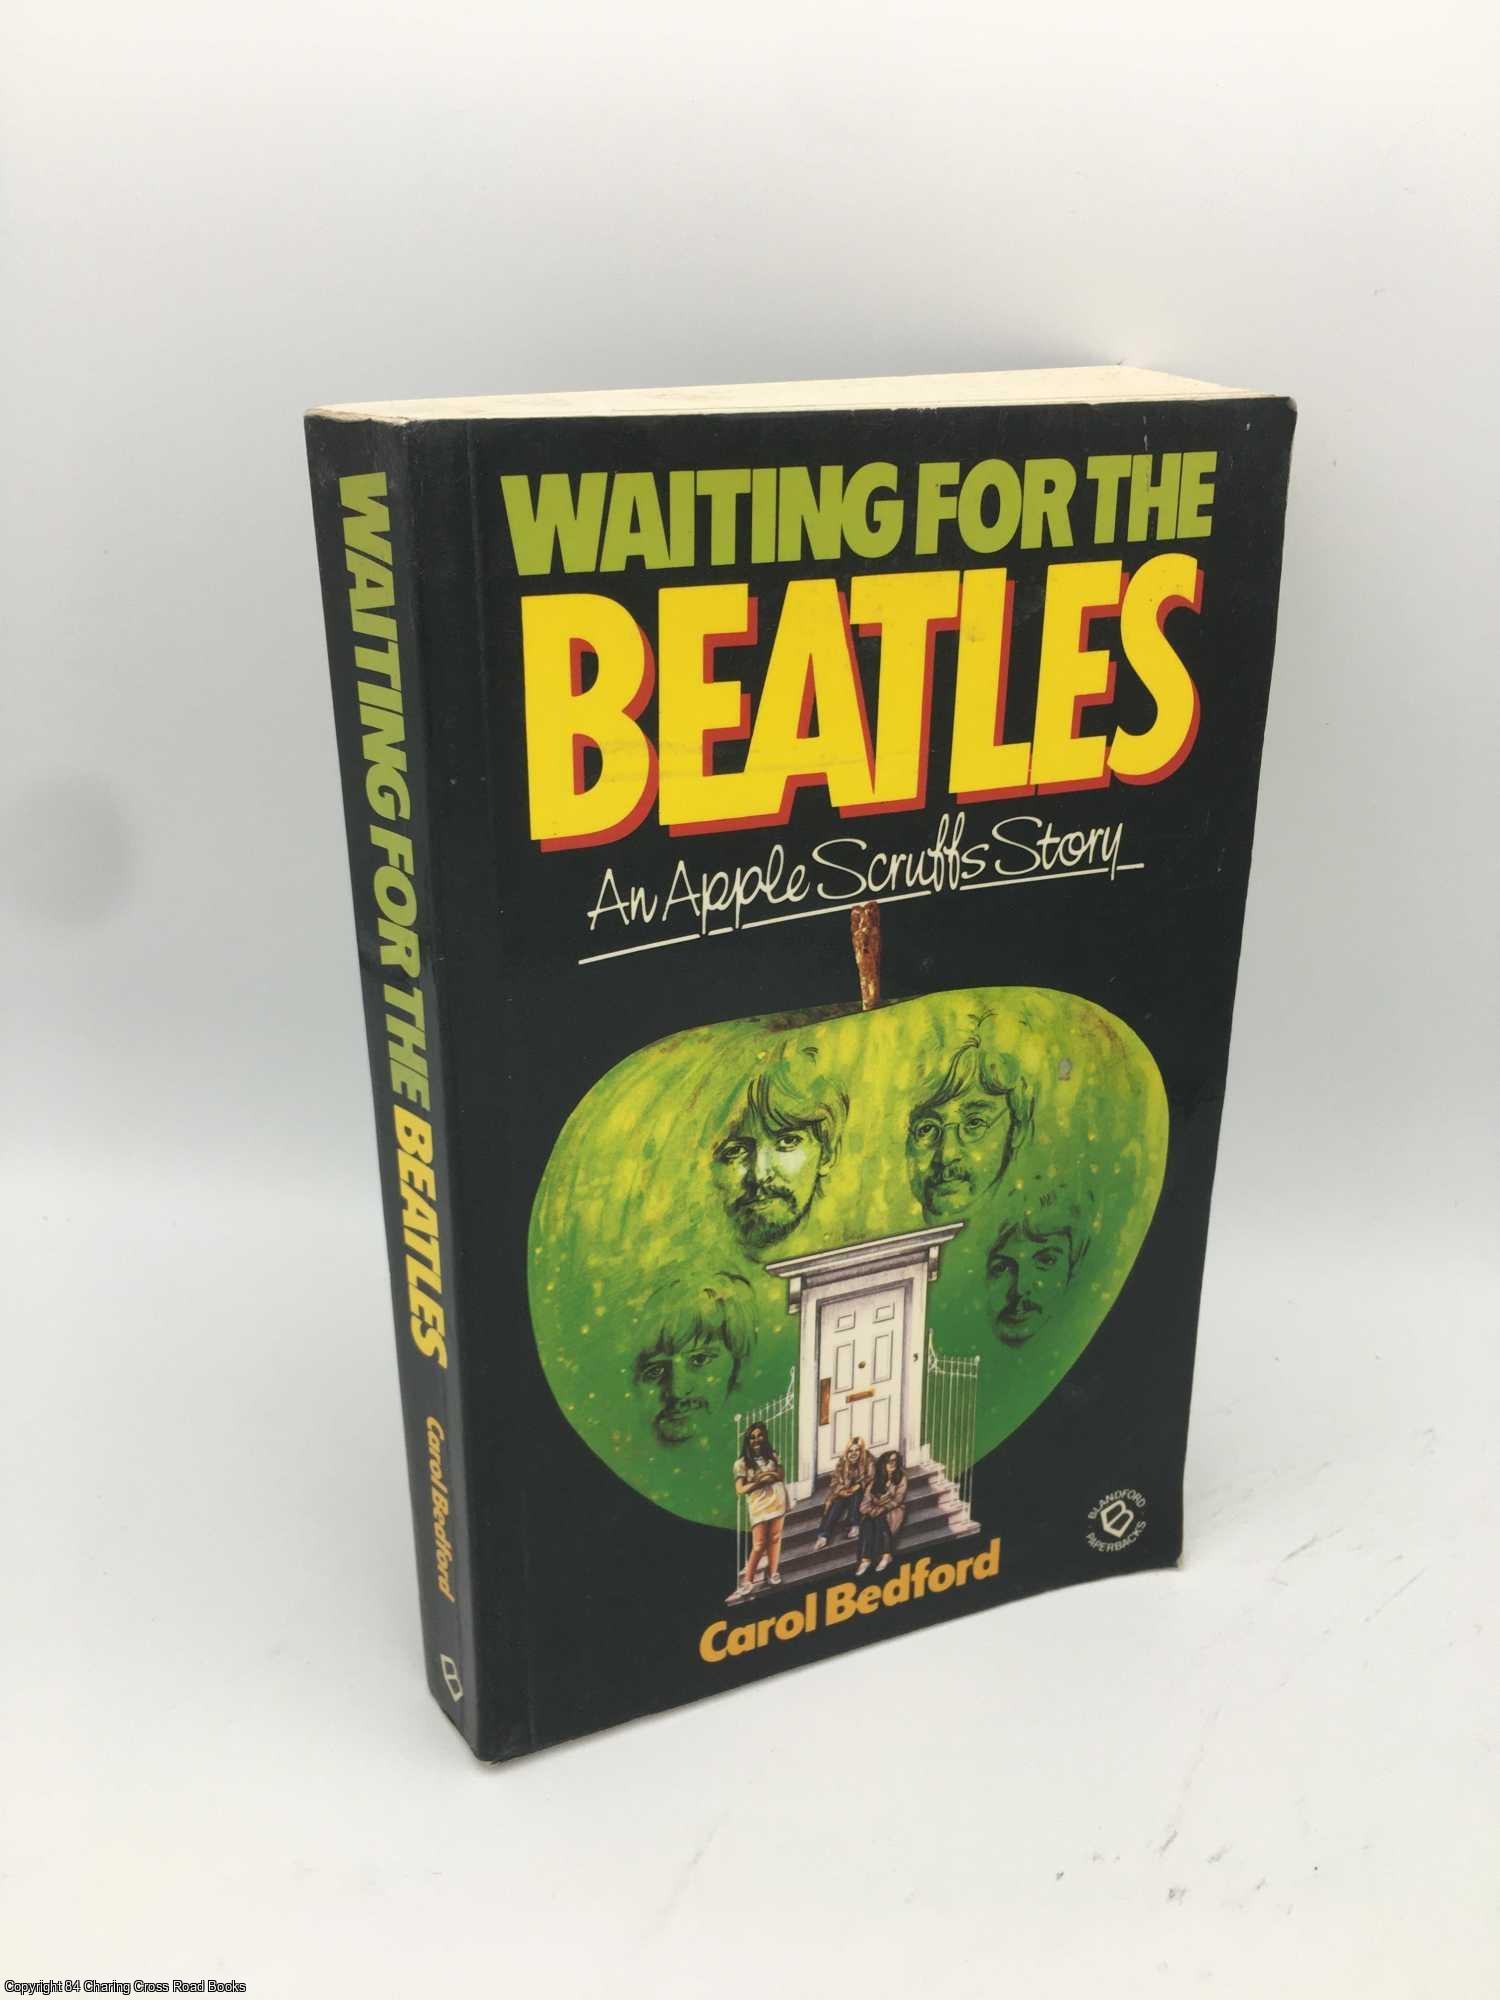 Bedford, Carol - Waiting for the Beatles: An Apple Scruff's Story